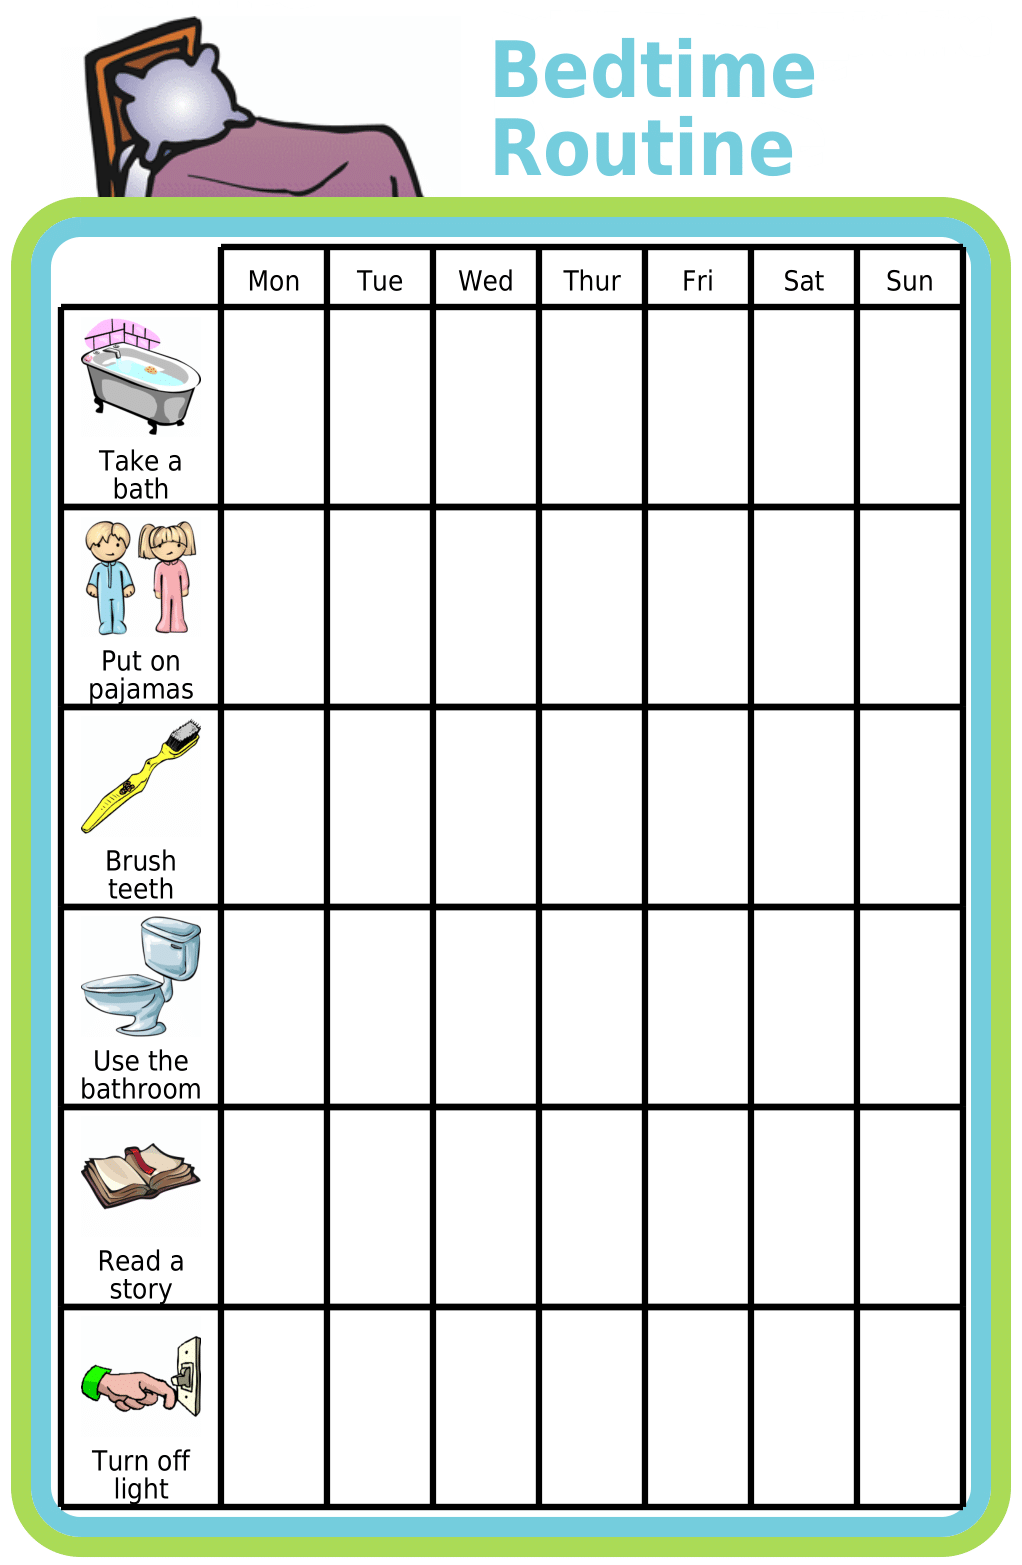 Bedtme routine picture checklist for kids